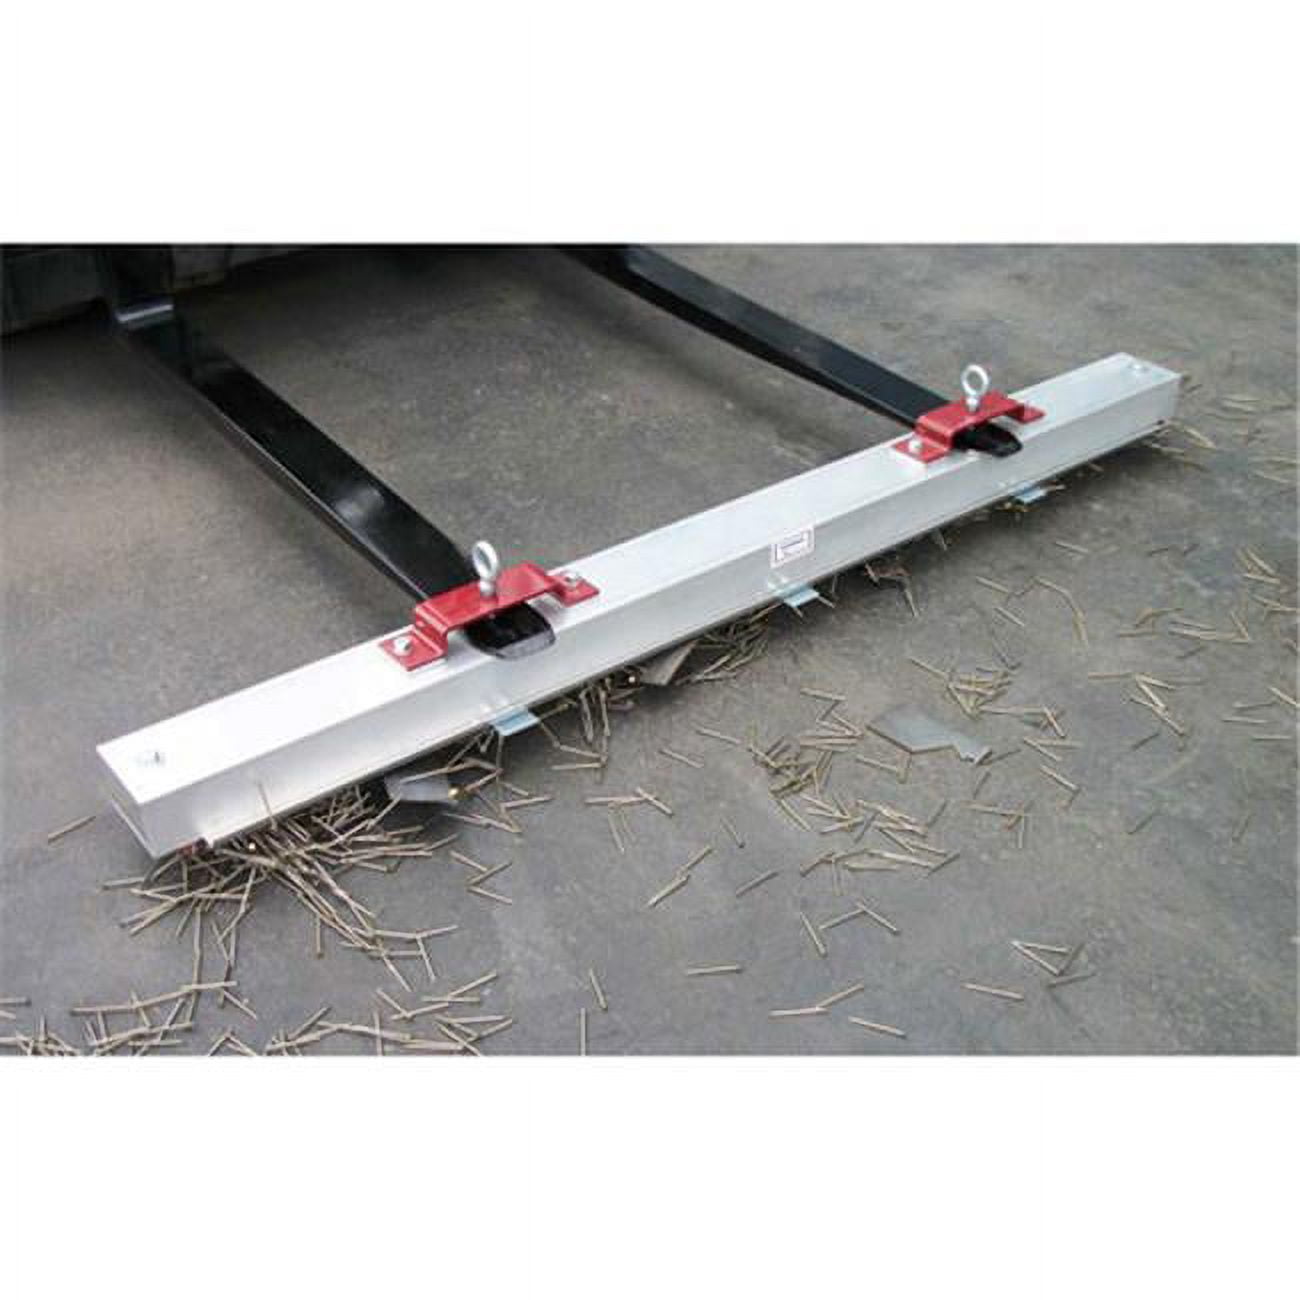 Rds-96lr 96 In. Double Strength Load Release Road Mag Sweeper - Silver & Burgundy